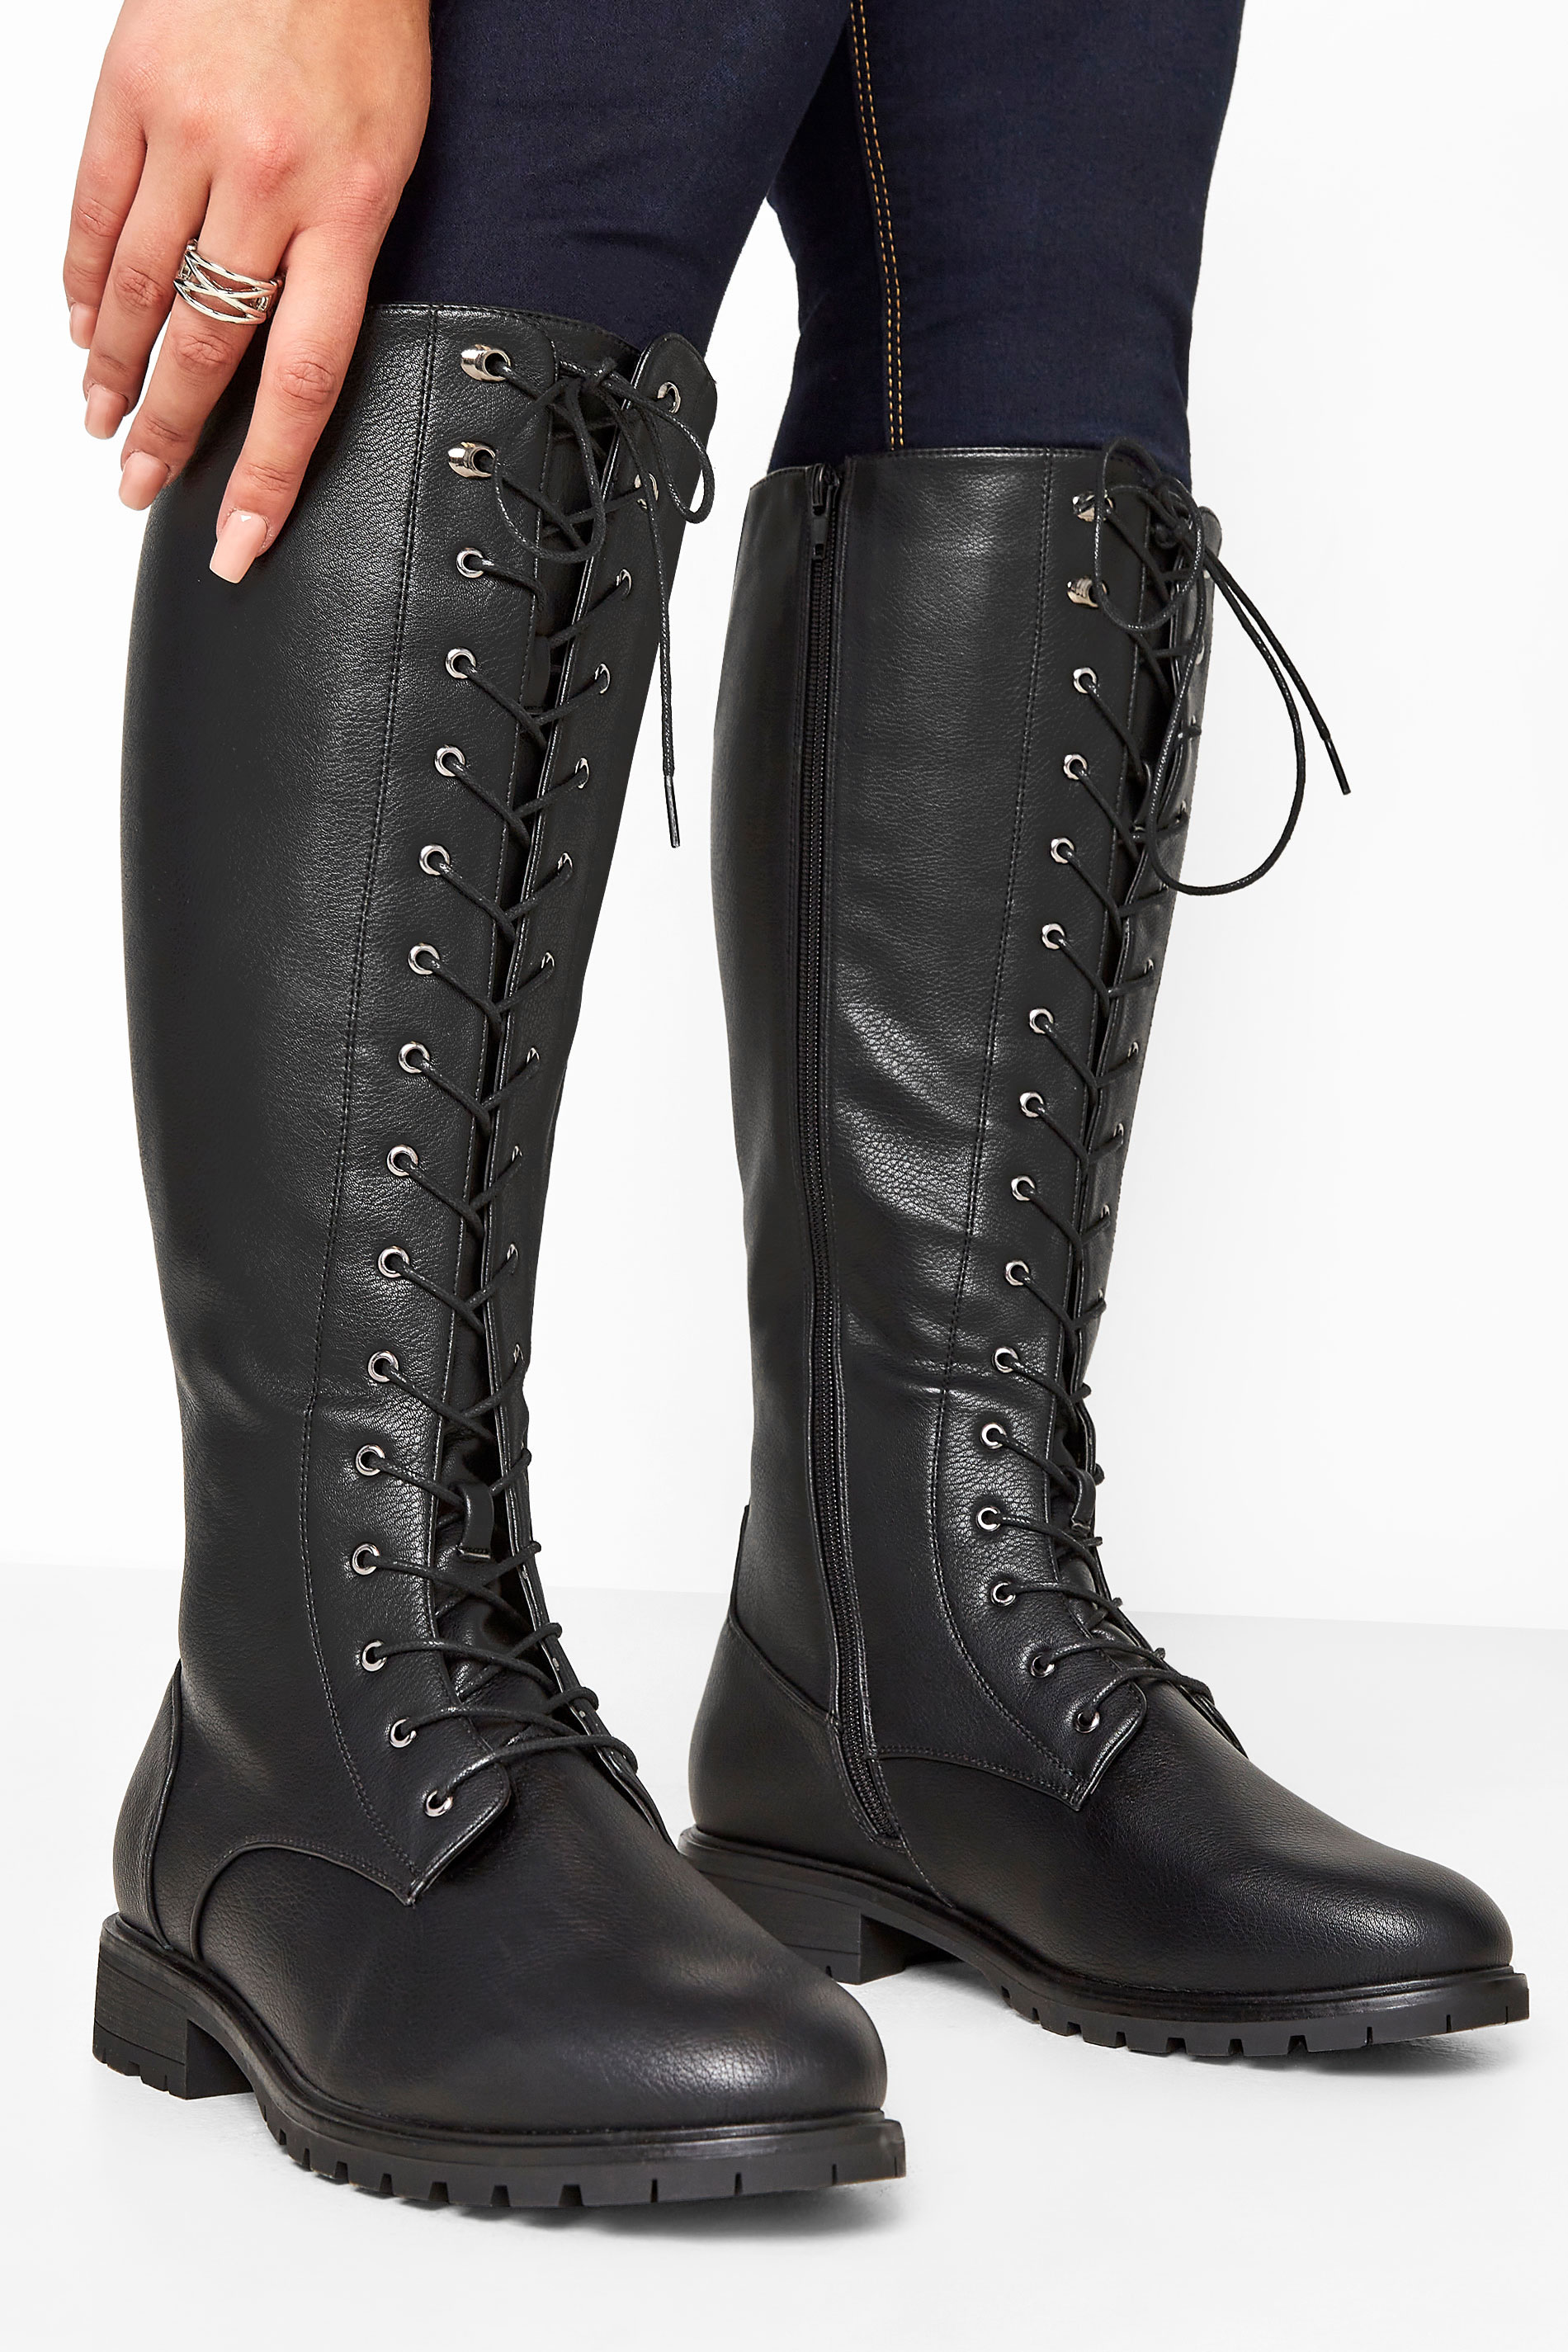 Black Faux Leather Lace Up Knee High Boots In Wide E Fit & Extra Wide ...